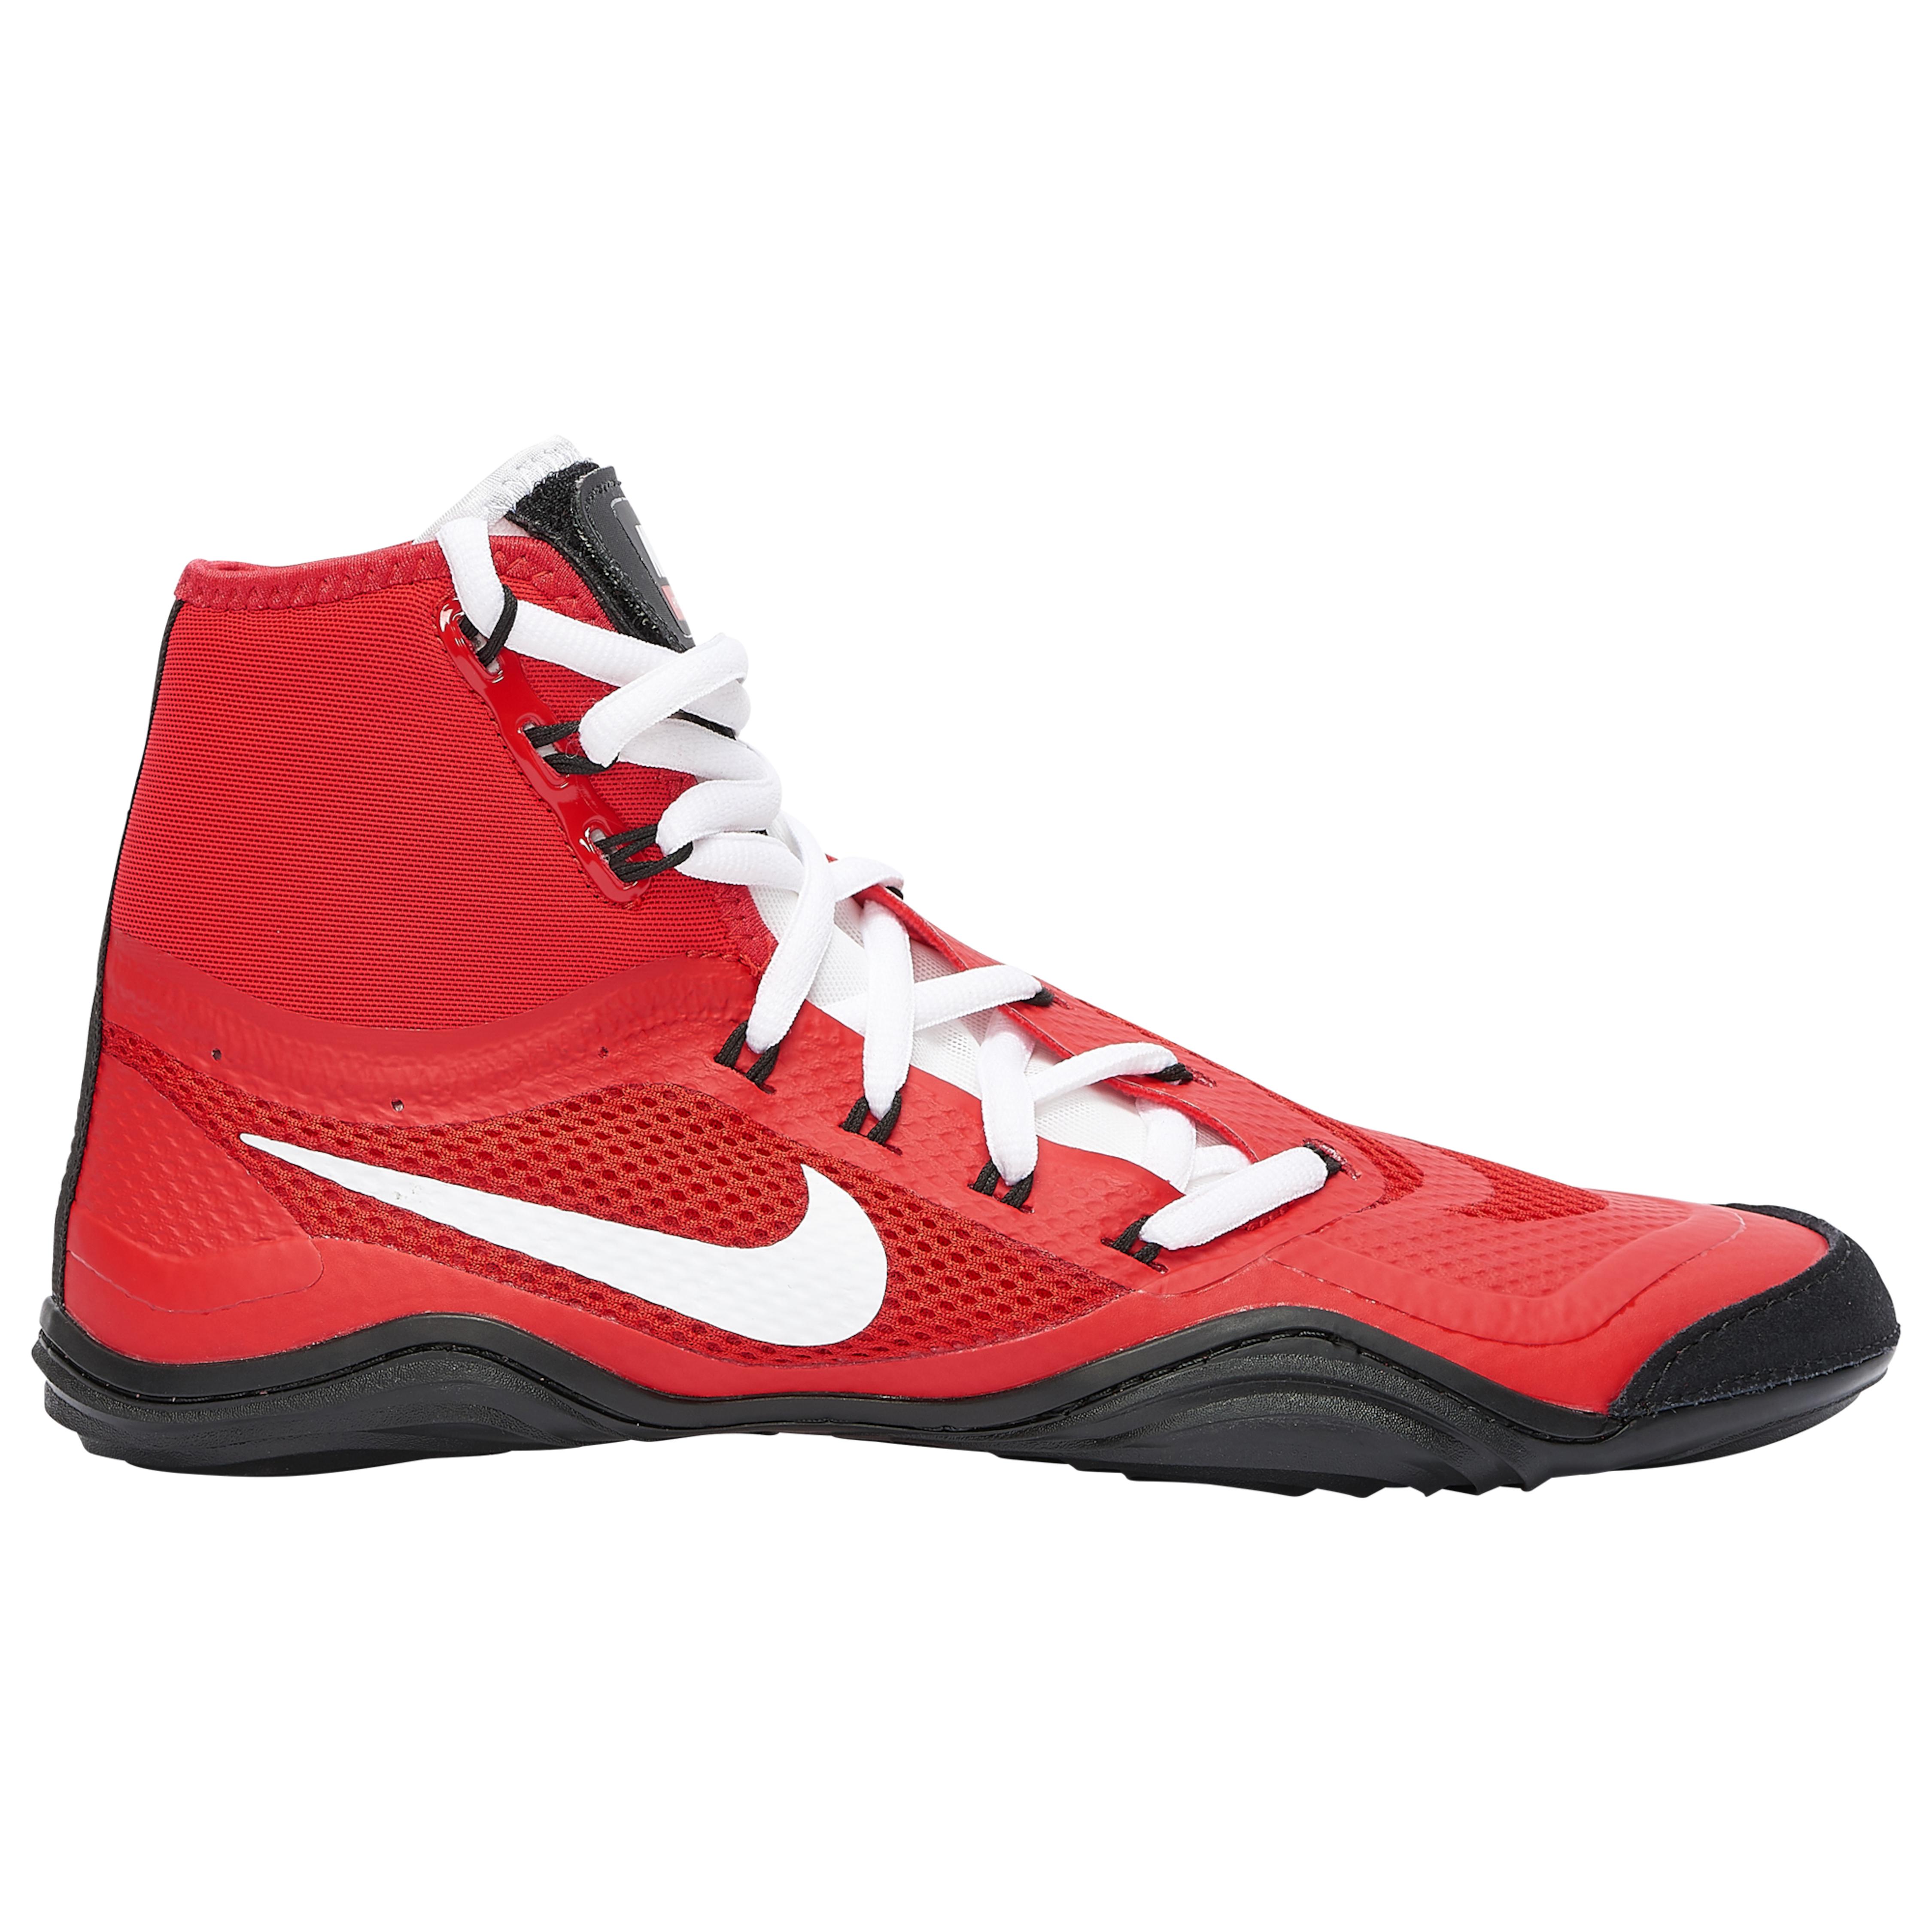 Nike Rubber Hypersweep in Red/White/Black (Red) for Men - Lyst